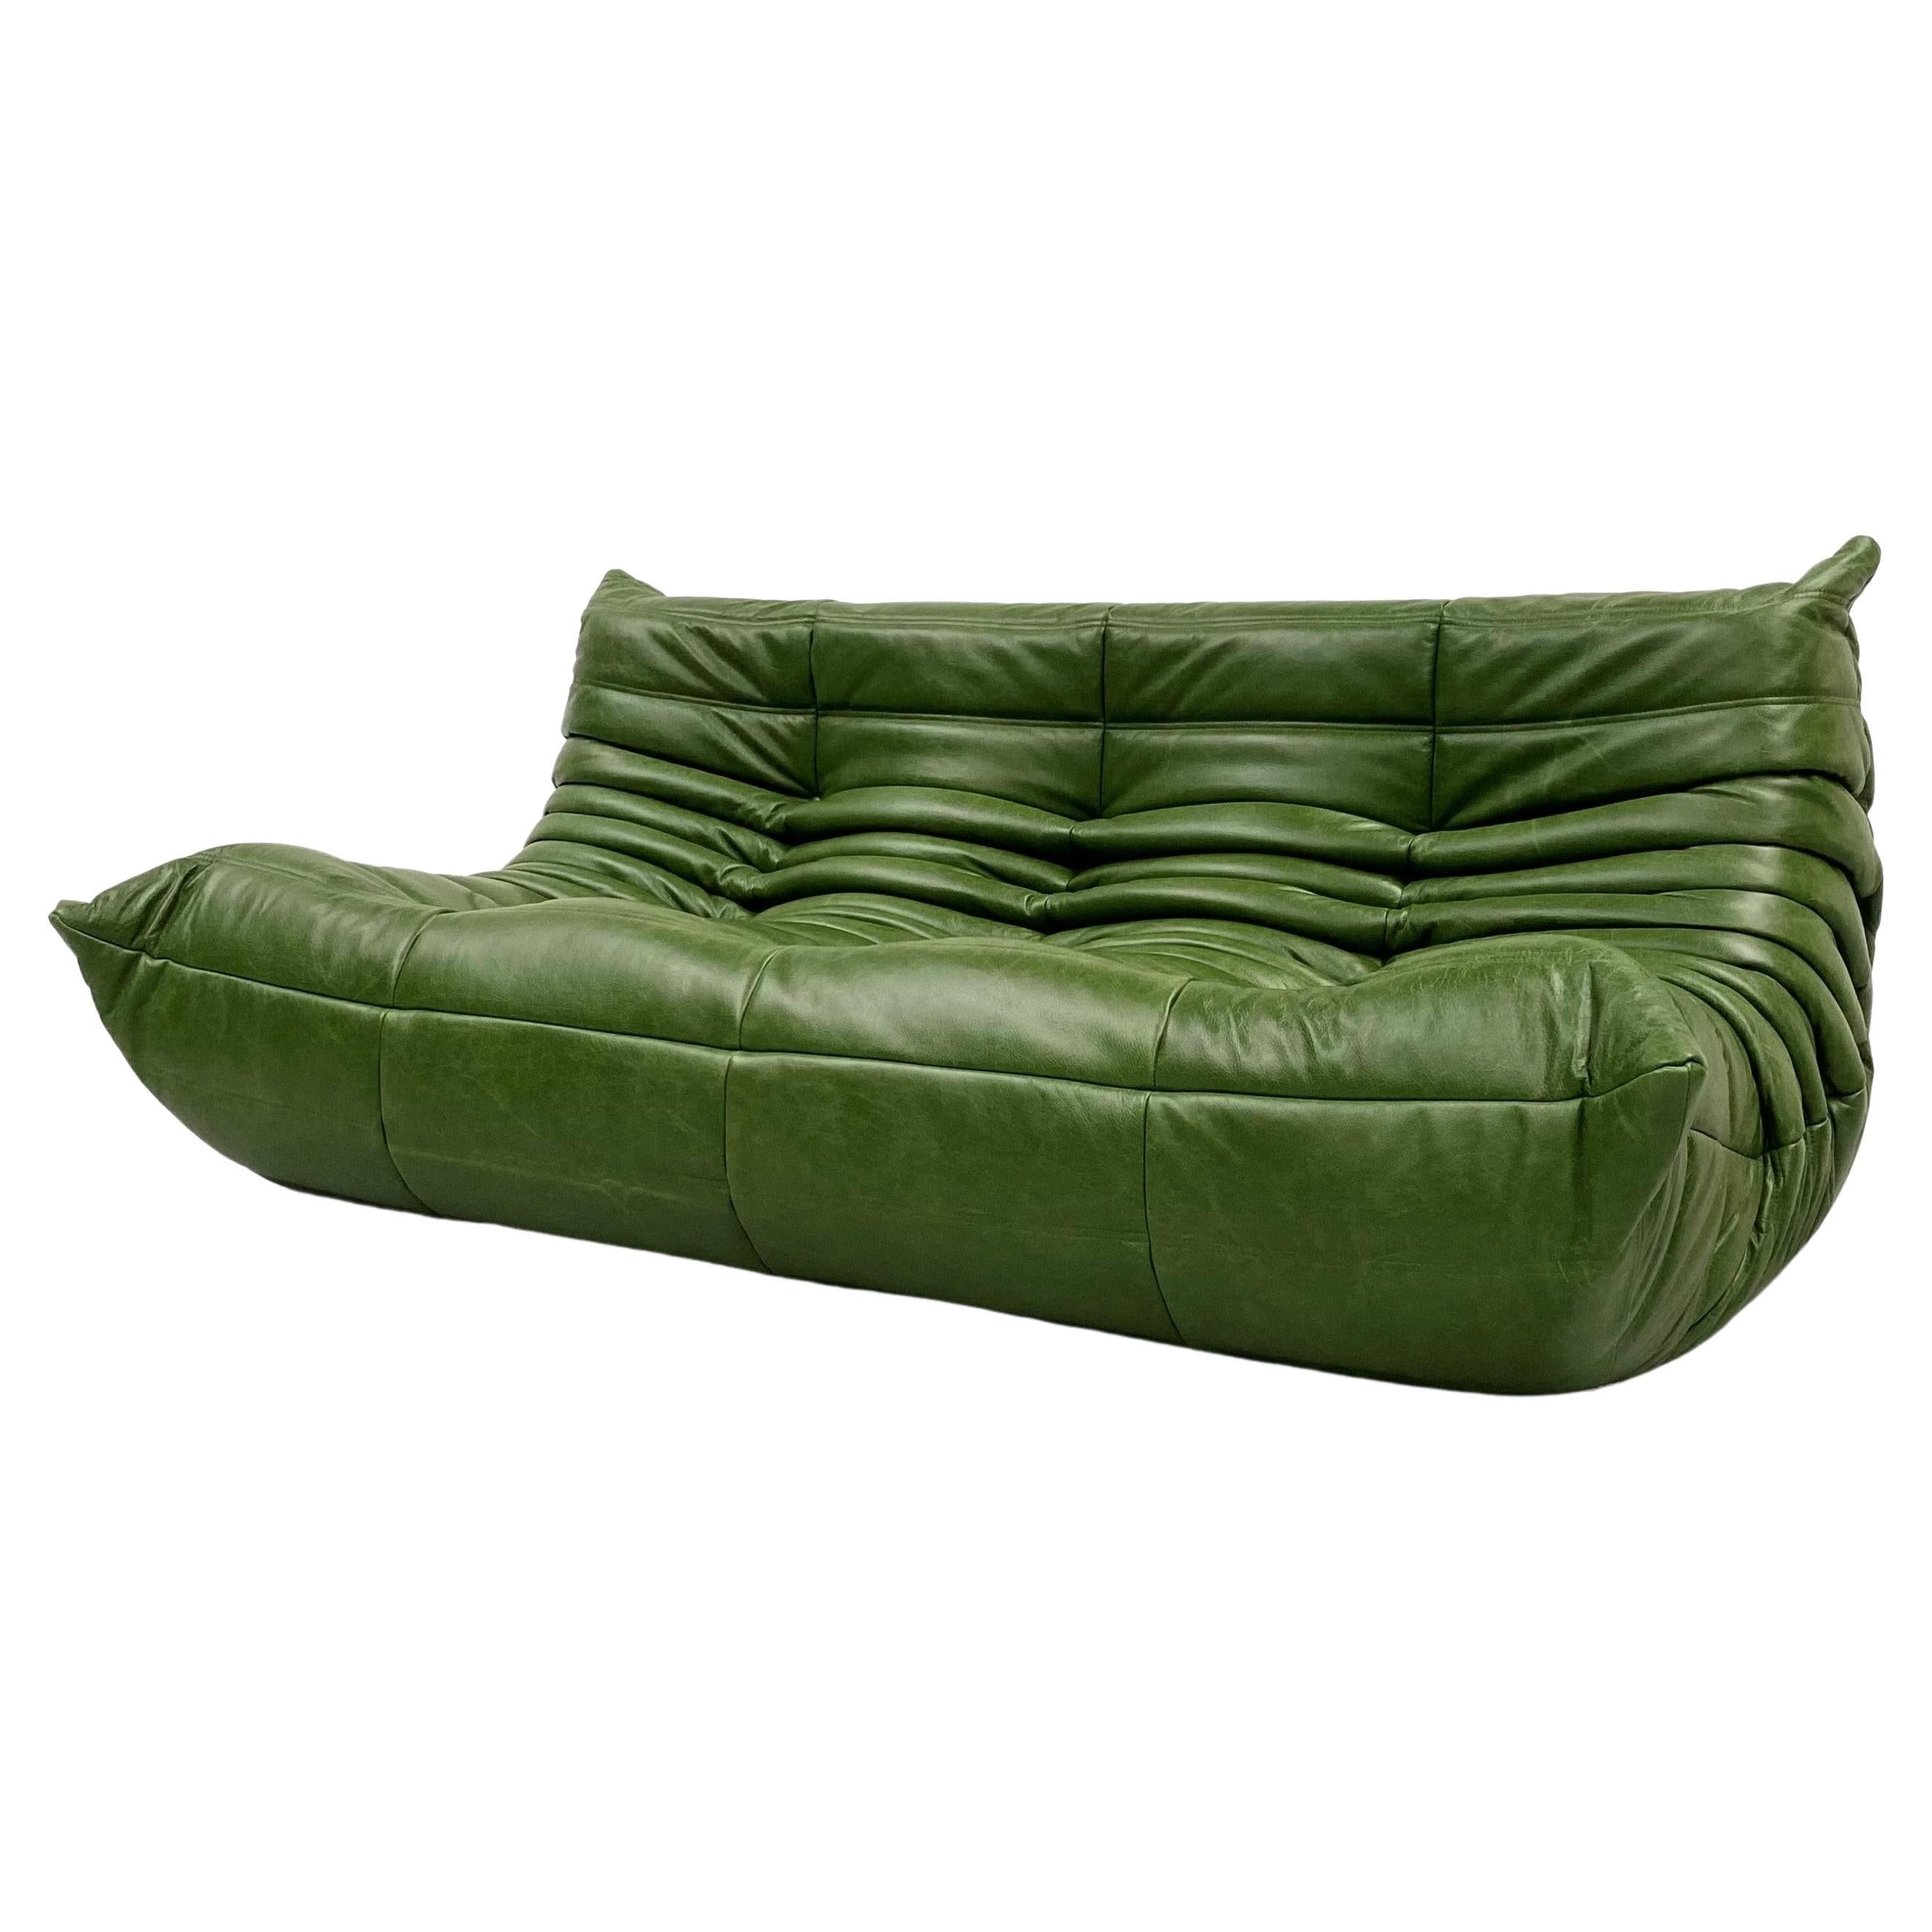 Vintage French Togo Sofa in Forest Green Leather by M. Ducaroy for Ligne Roset